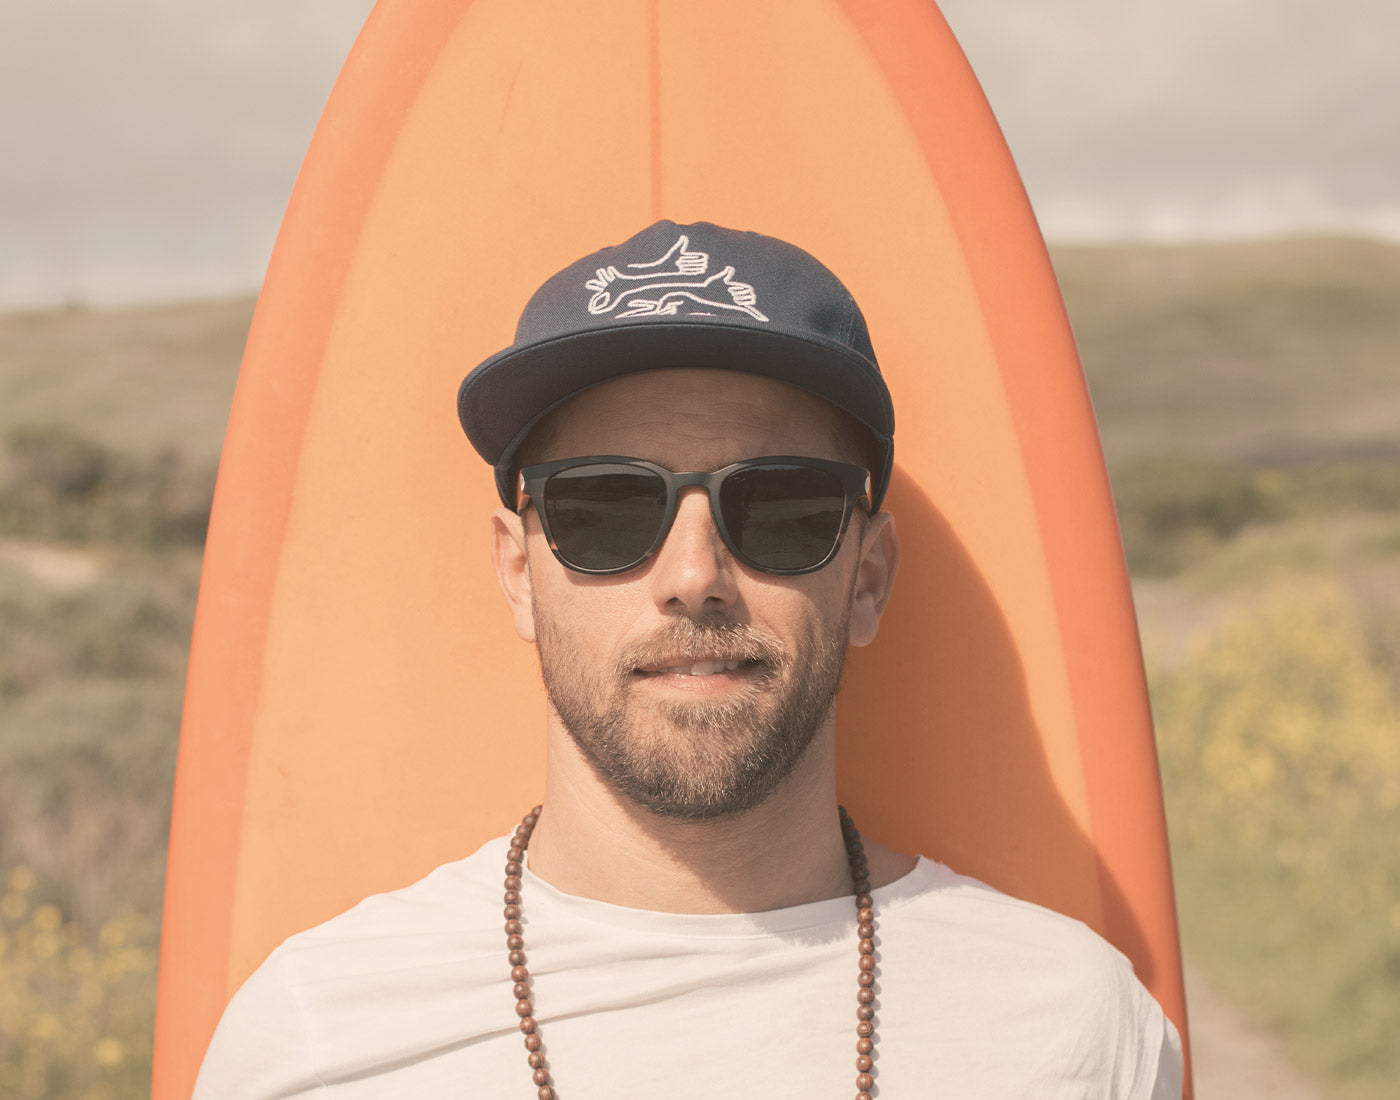 guy standing in front of surfboard wearing sunski topeka sunglasses